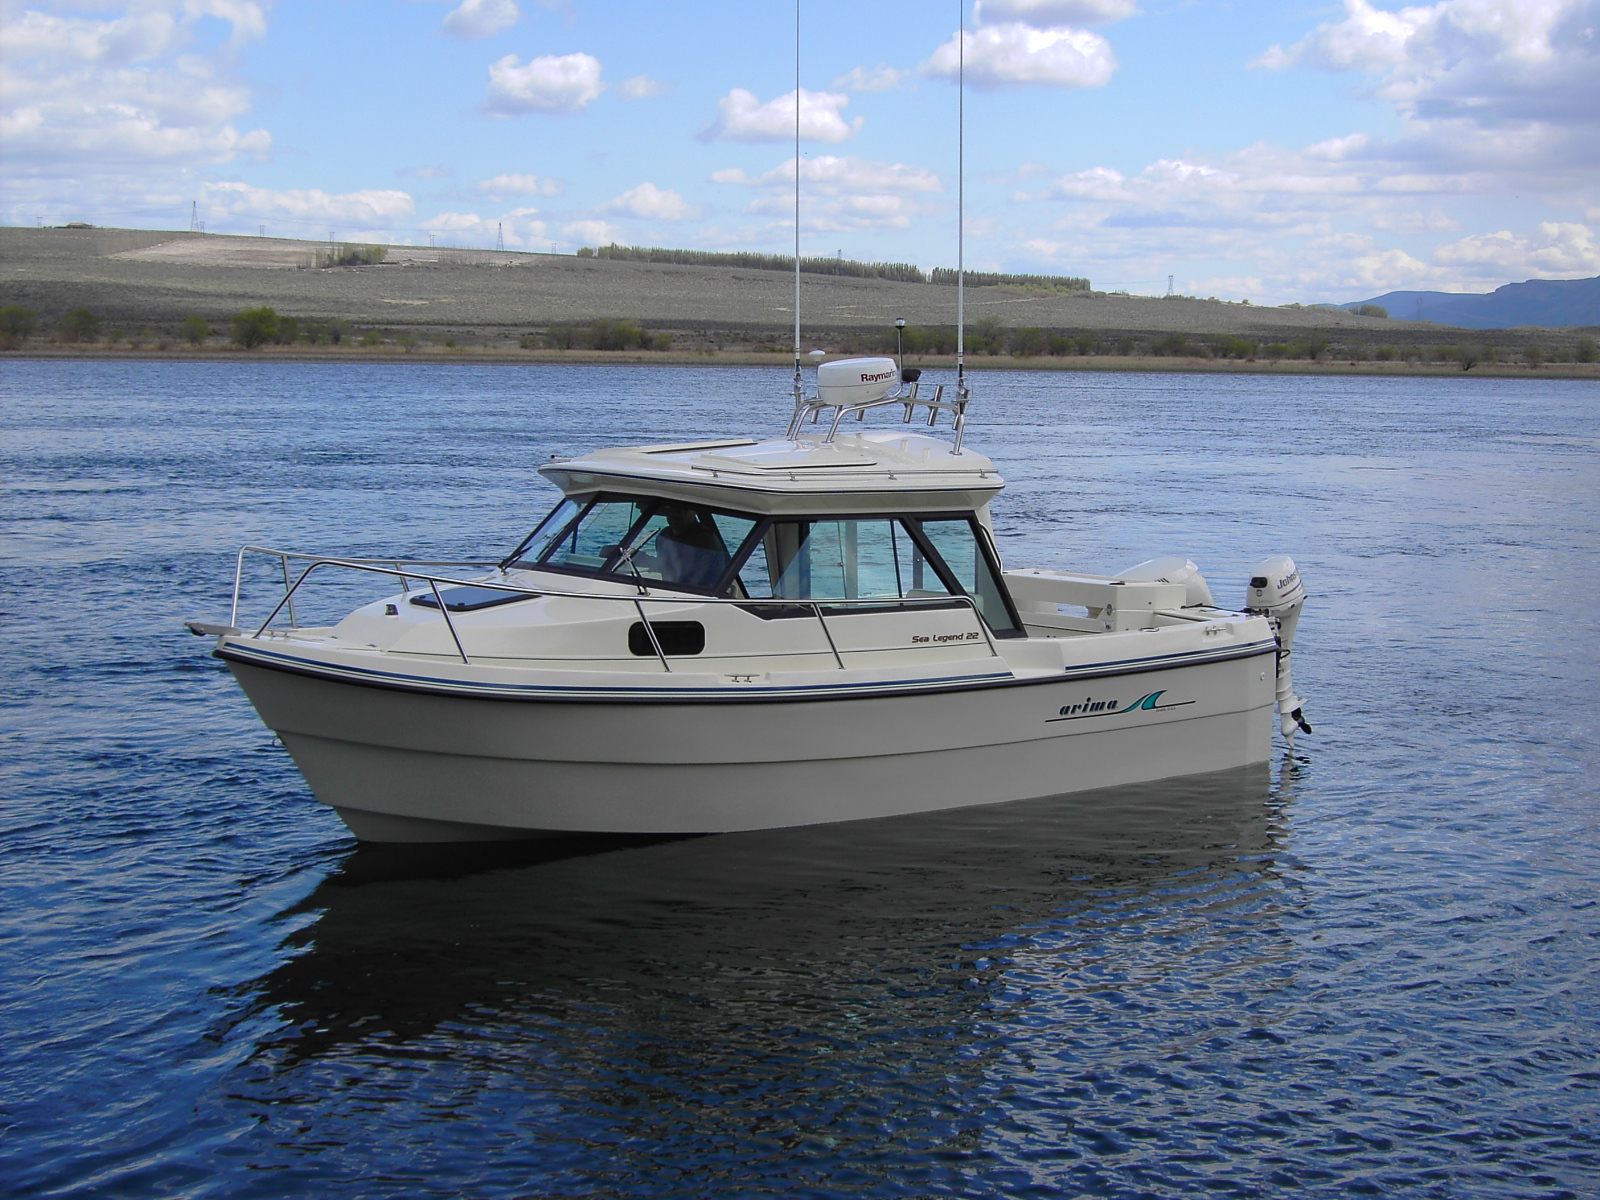 22' Arima Sea Legend Hard Top is a very open space oriented cabin boat. With the cabin construction designed to provide comfort for the fisherman and to ...